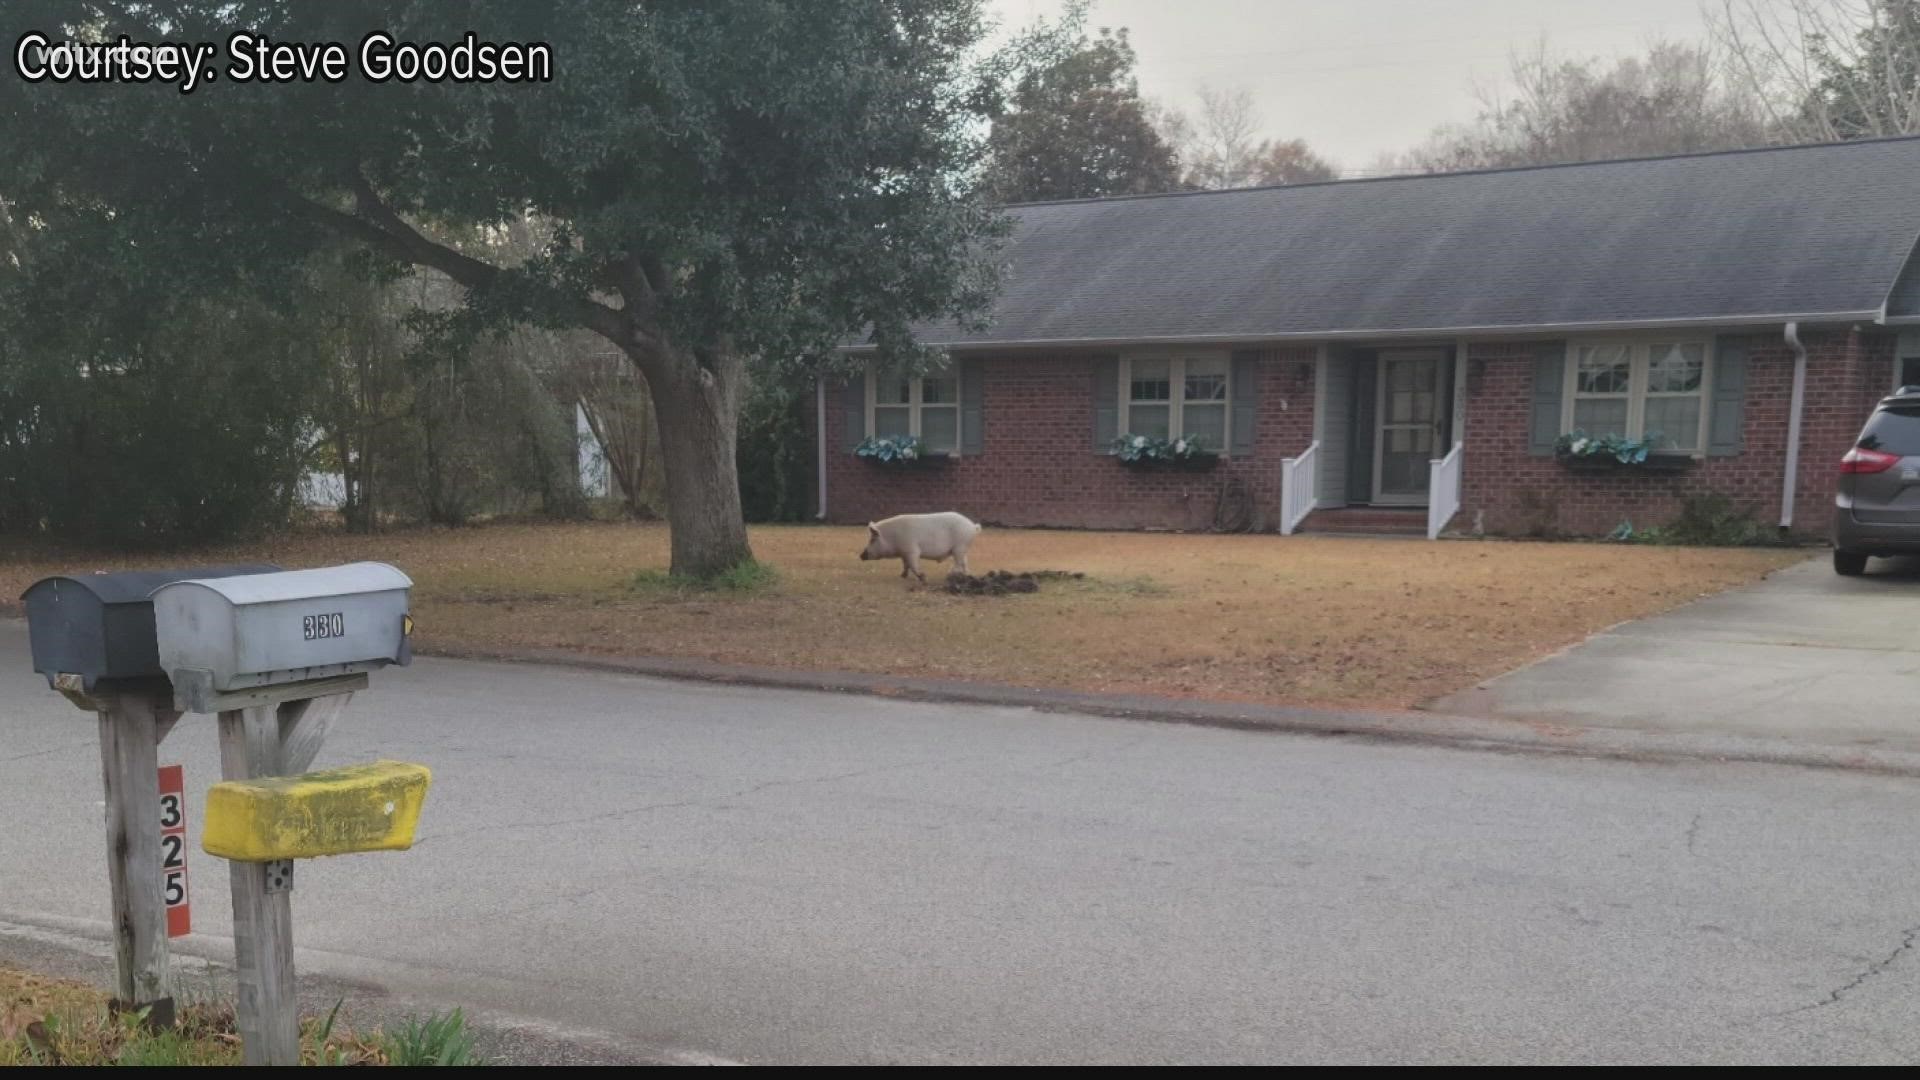 Animal control has been chasing the hog, who is pink and about 200 pounds.